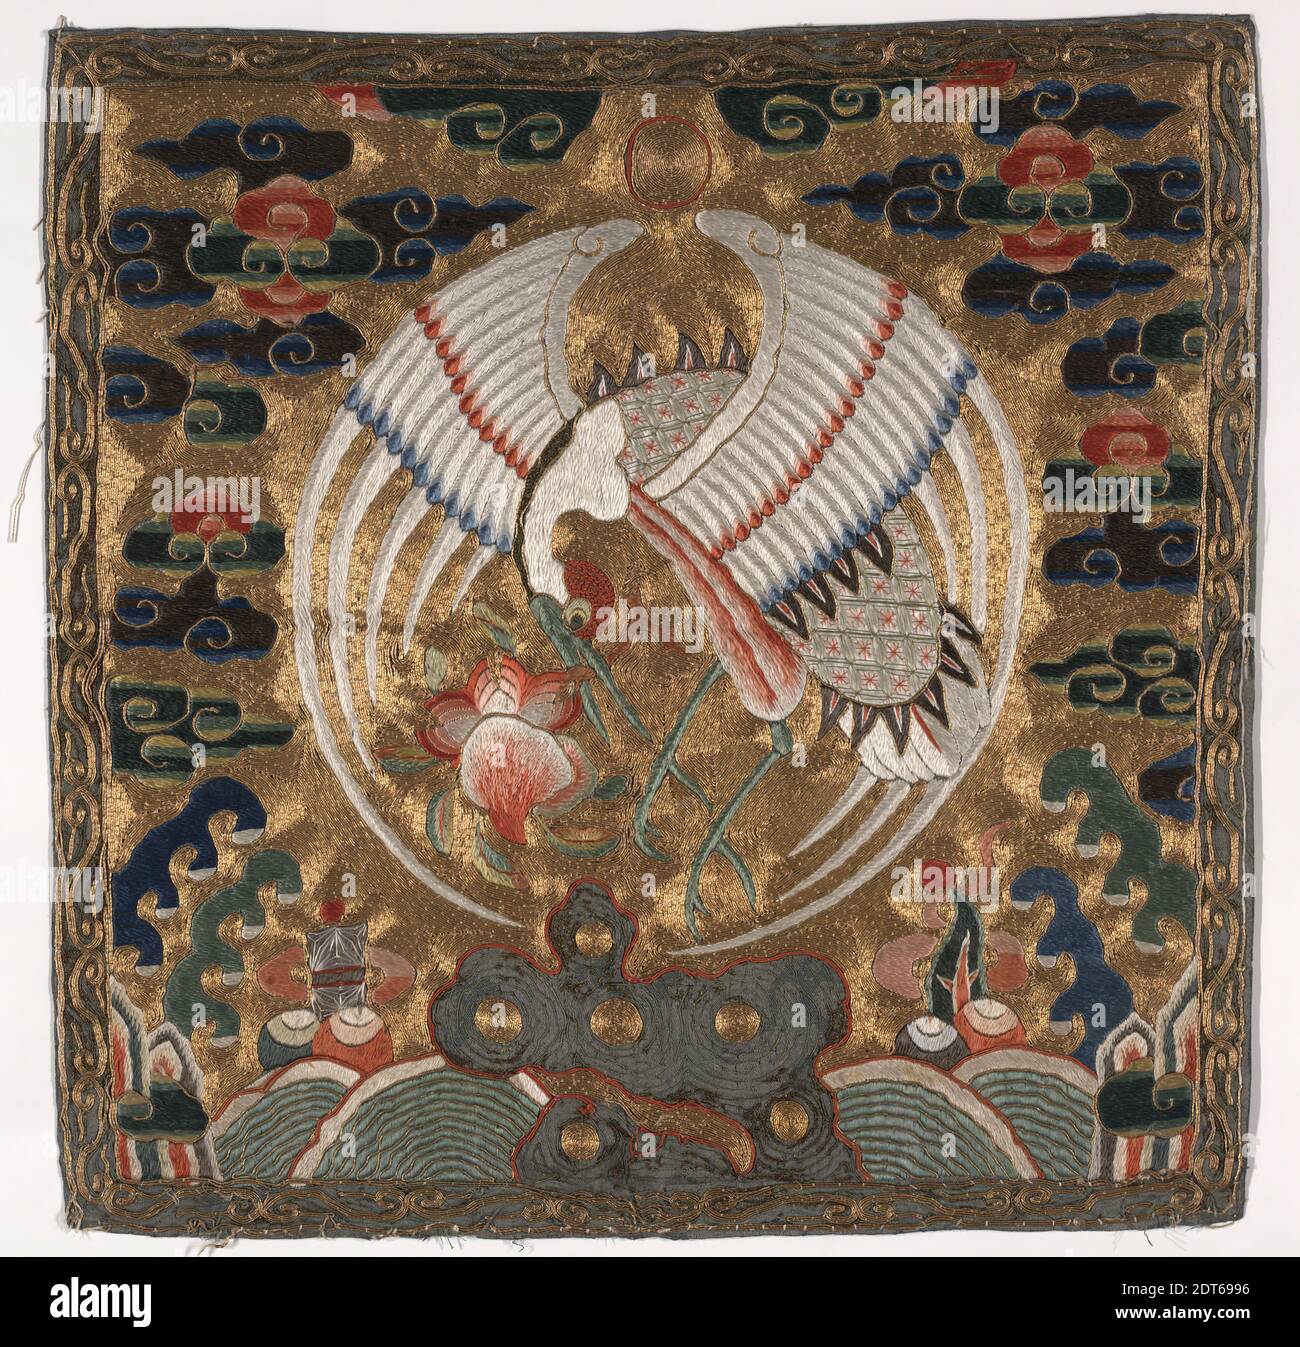 Rank Badge with Crane for First Degree Civil Official, mid-17th century, Silk, worked in satin stitch, couched gold-wrapped thread, and peacock feathers, 12 3/4 × 12 3/4 in. (32.4 × 32.4 cm), China, Chinese, Qing dynasty (1644–1911), Textiles Stock Photo